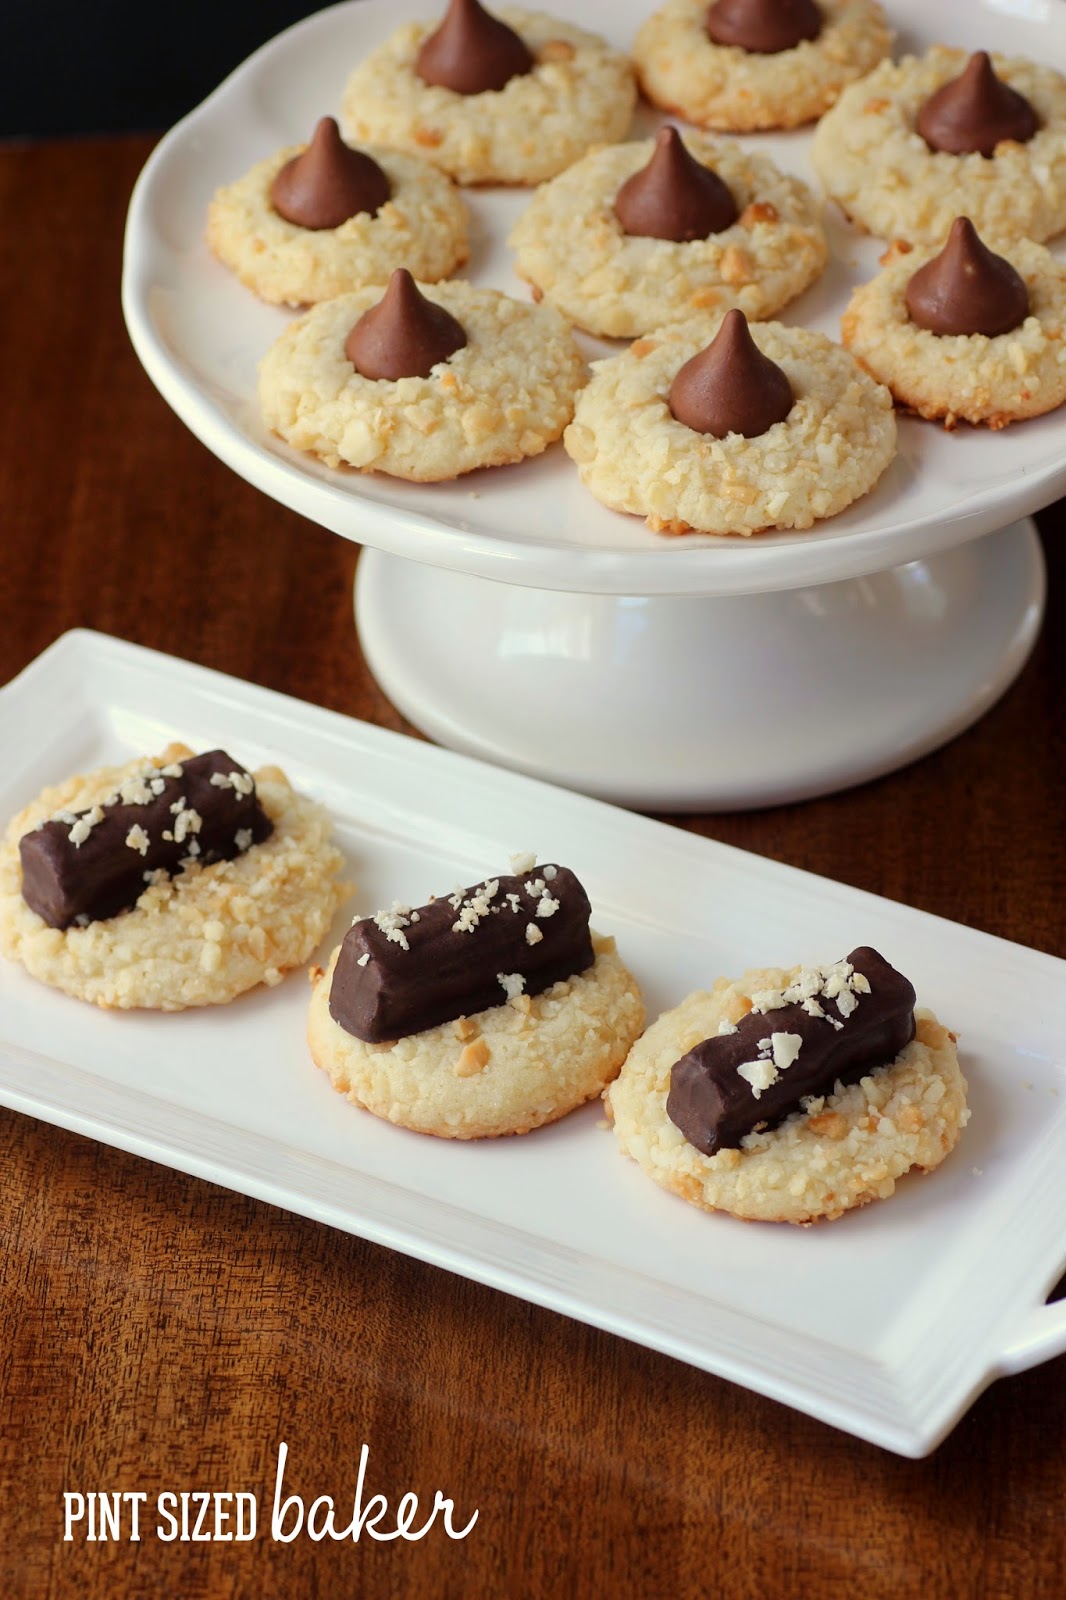 Just like the fun Kiss Blossom Cookies, but these Macadamia Nut Blossoms are coated in chopped macadamia nuts and have a Macadamia Kiss in the center.